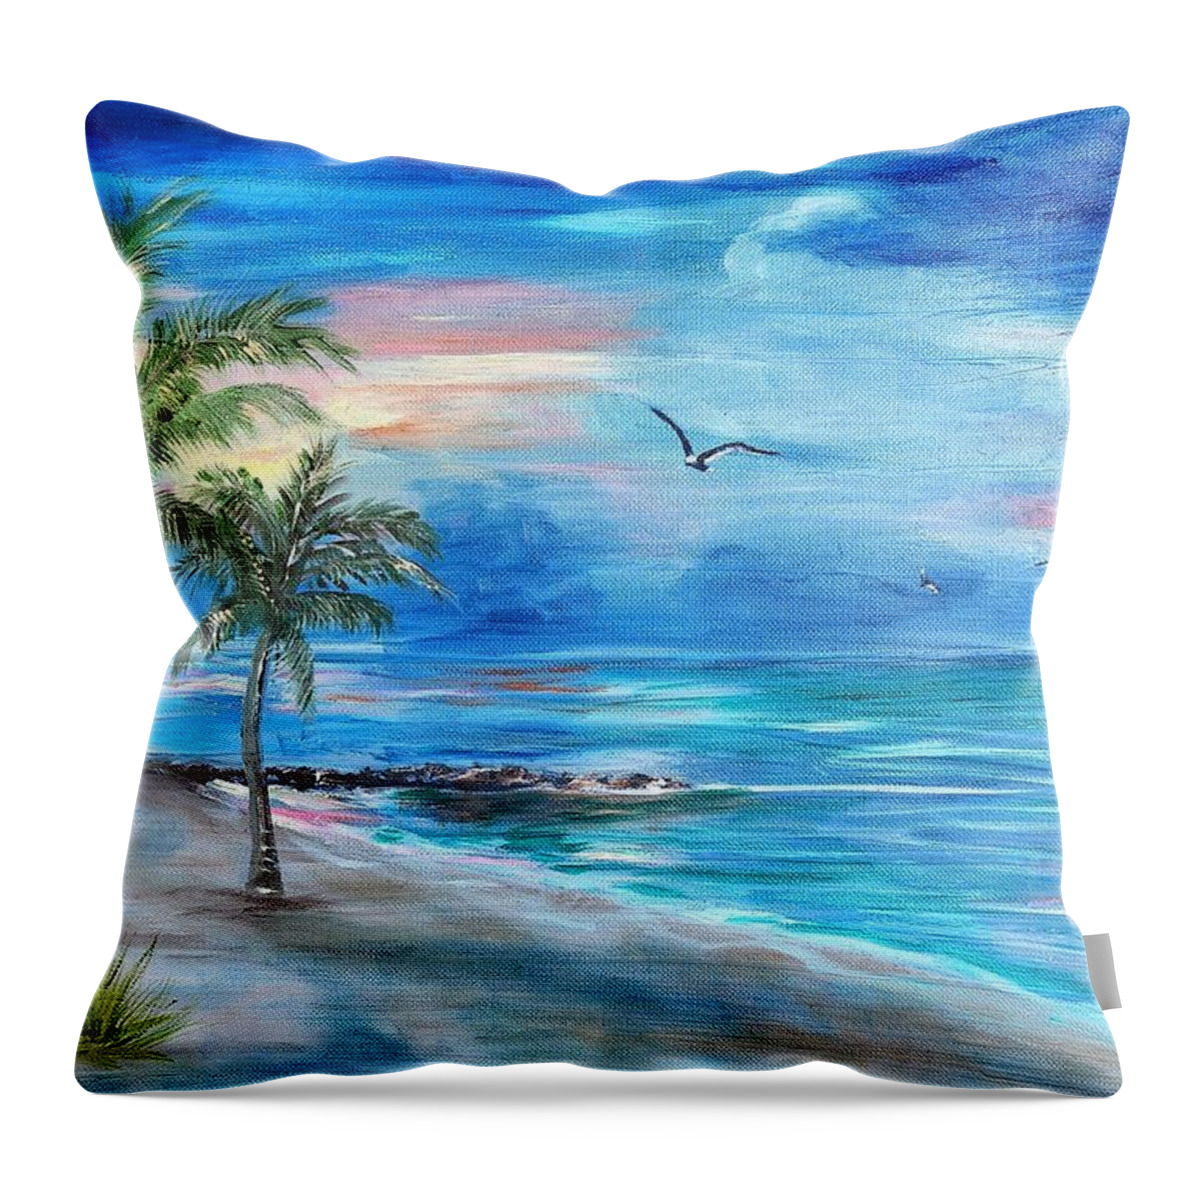 Smathers Beach Throw Pillow featuring the painting Smathers at Dawn by Linda Cabrera